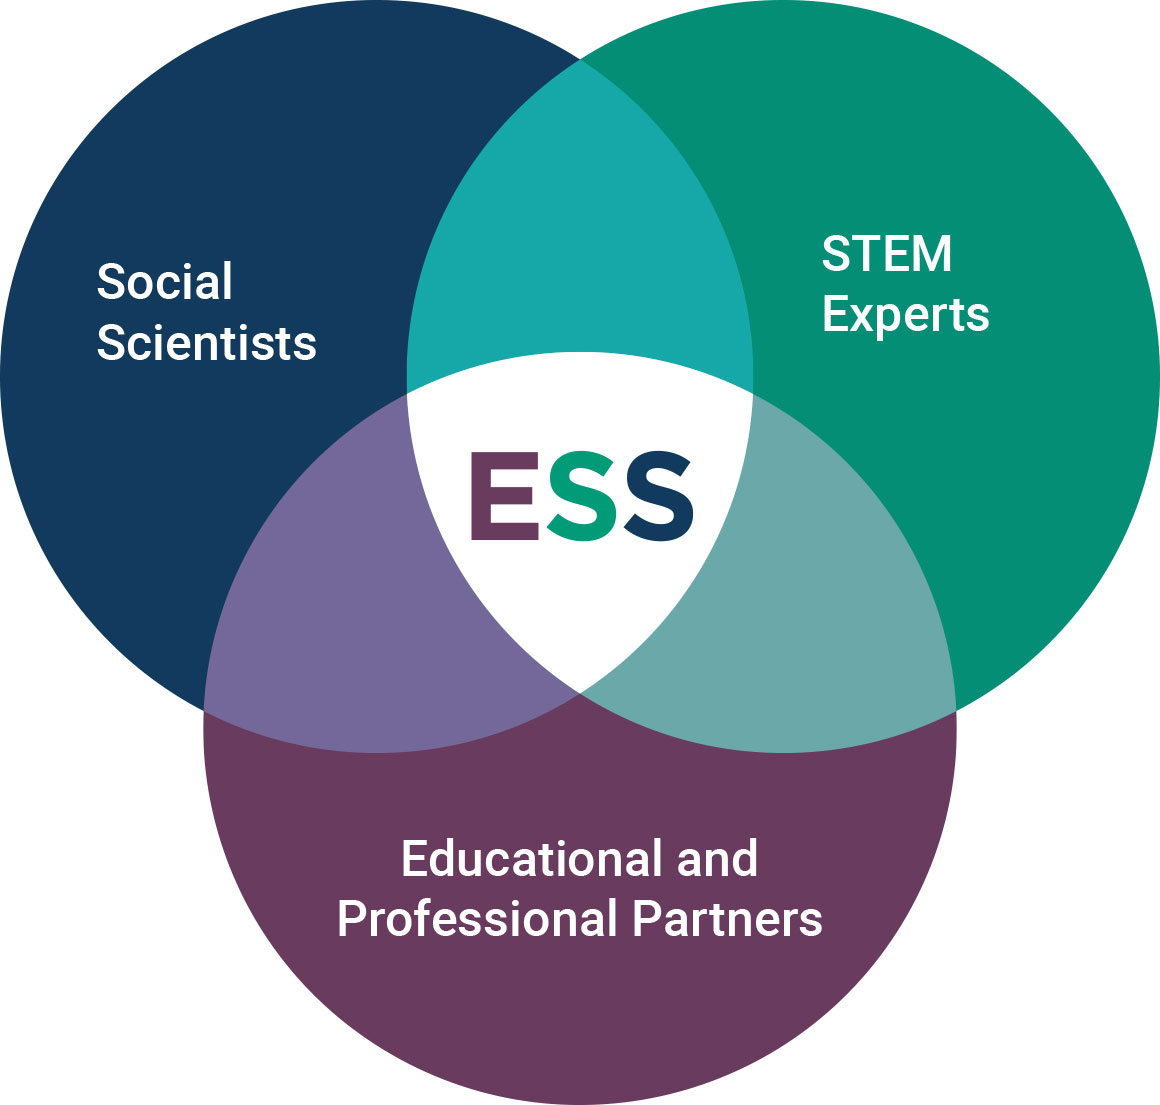 A Venn diagram with three overlapping circles. The three circles are labeled "social scientists," "STEM experts," and "educational and professional partners." The ESS logo is at the intersection of all three circles.